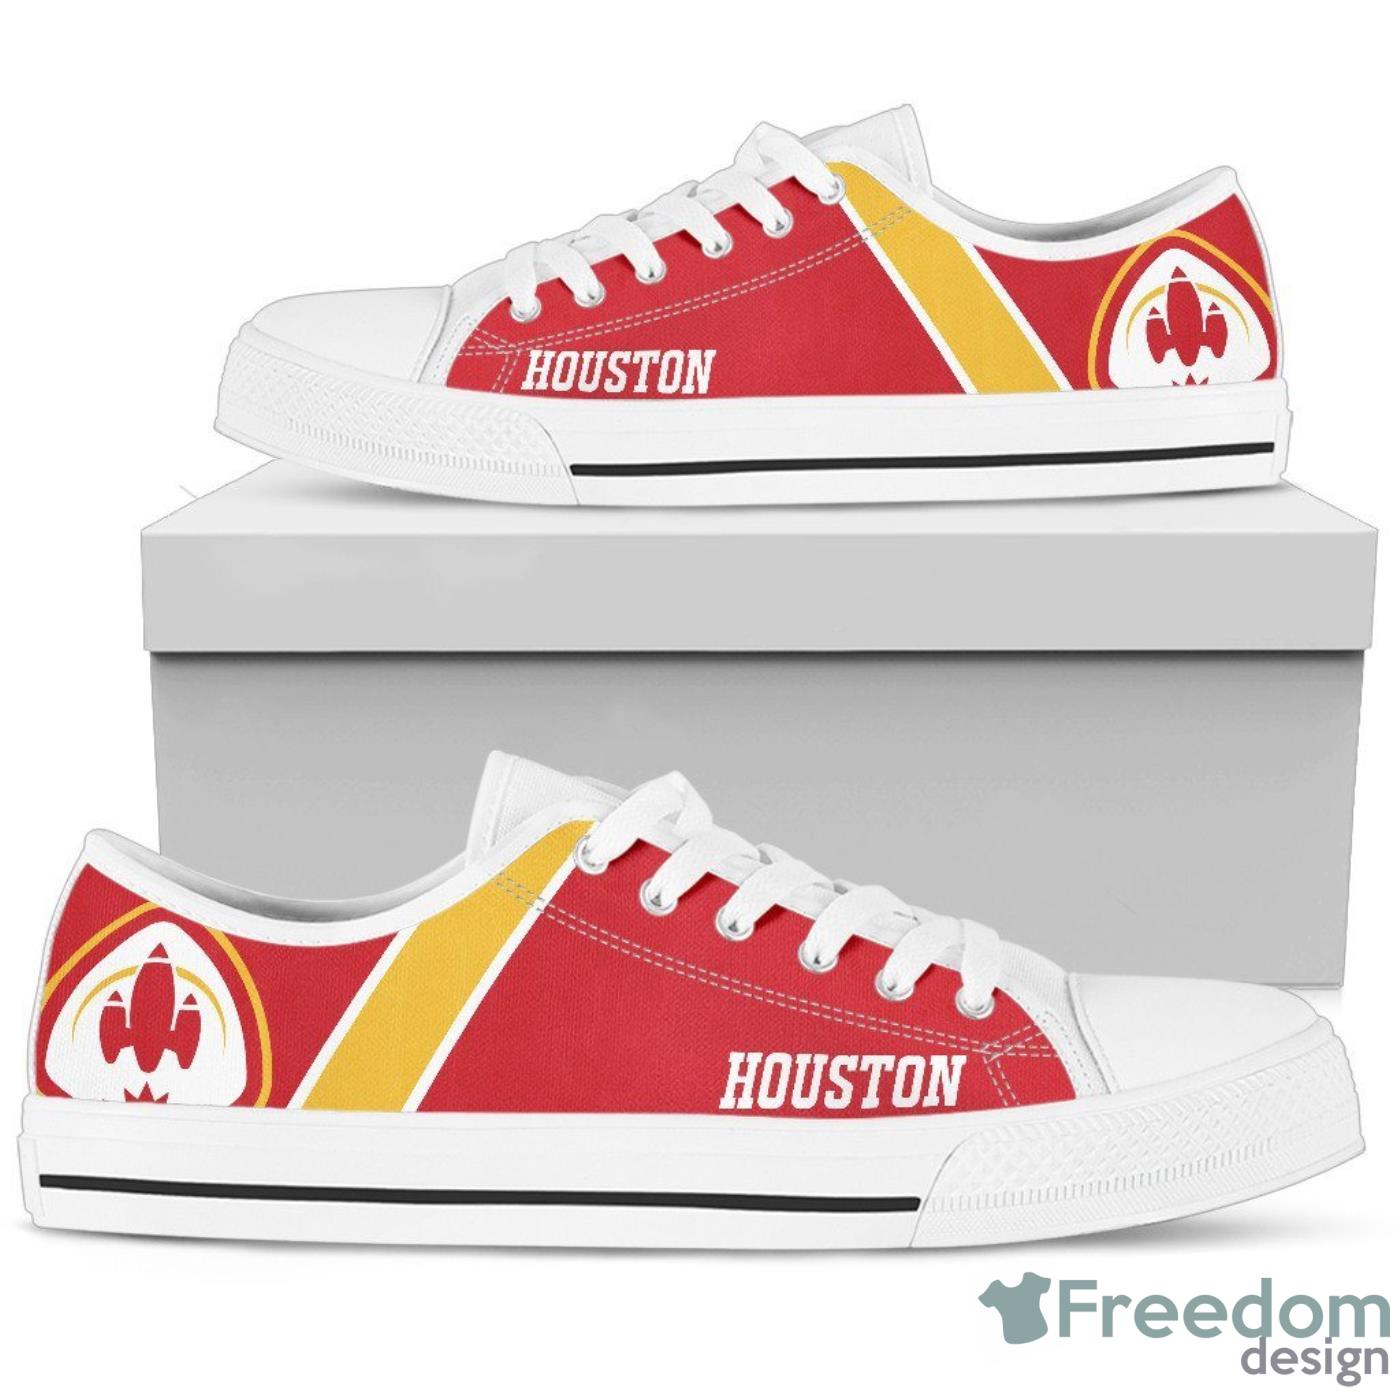 Houston Casual Sneakers Low Top Canvas Shoes For Men And Women Product Photo 2